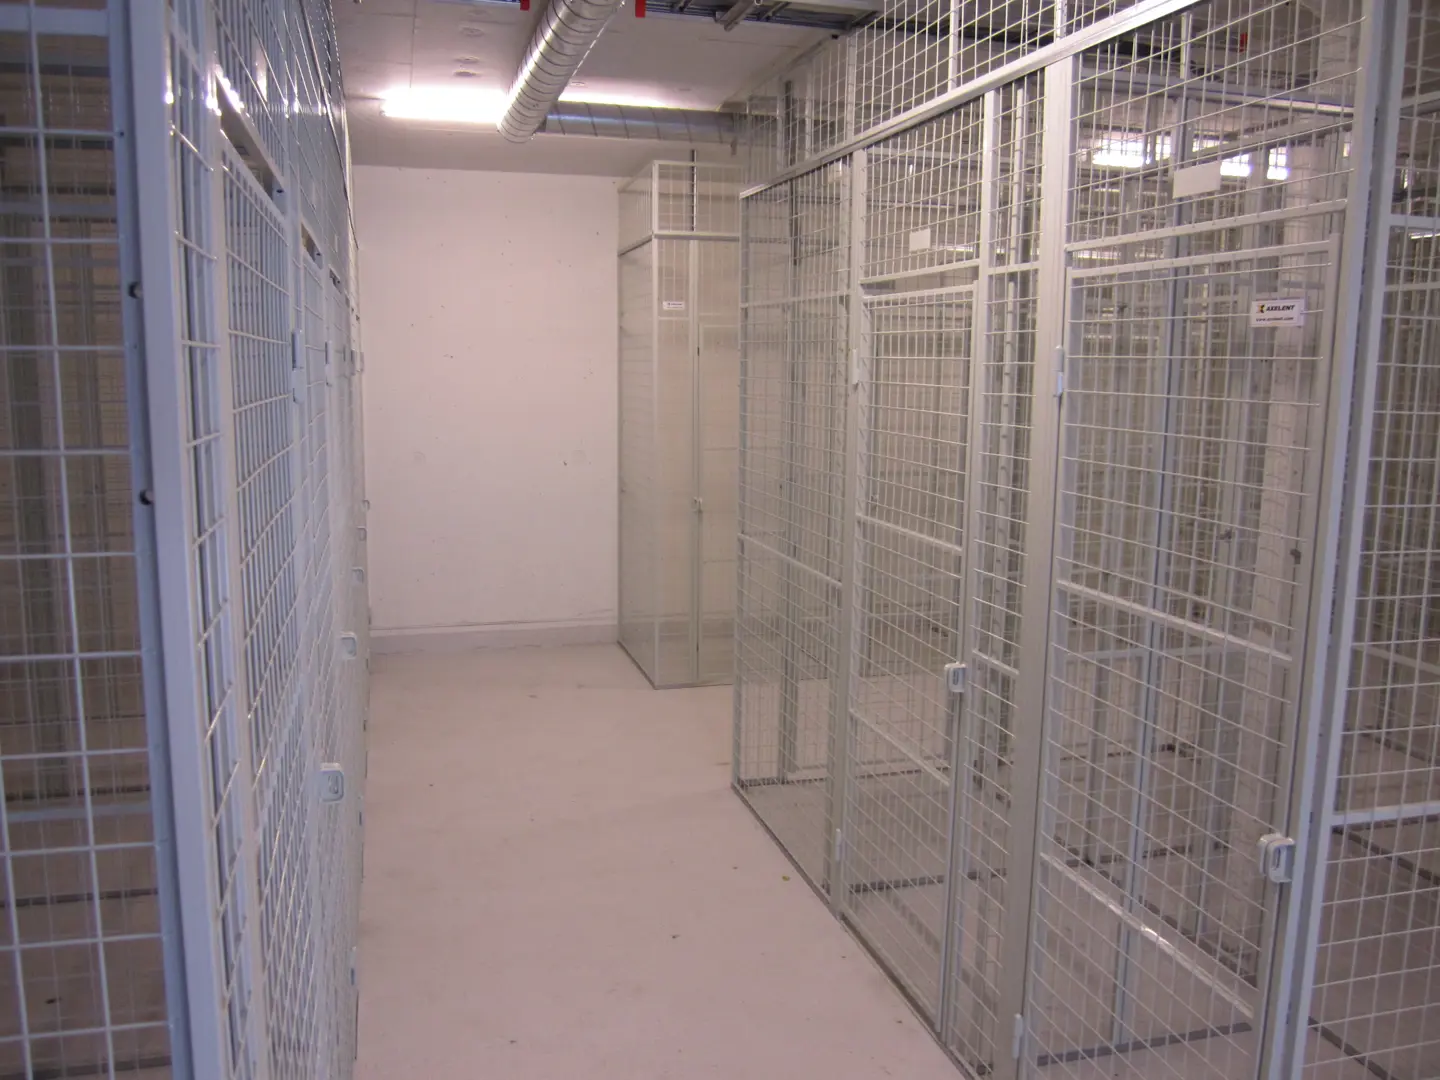 Basement storage mesh cages for apartments and flats.